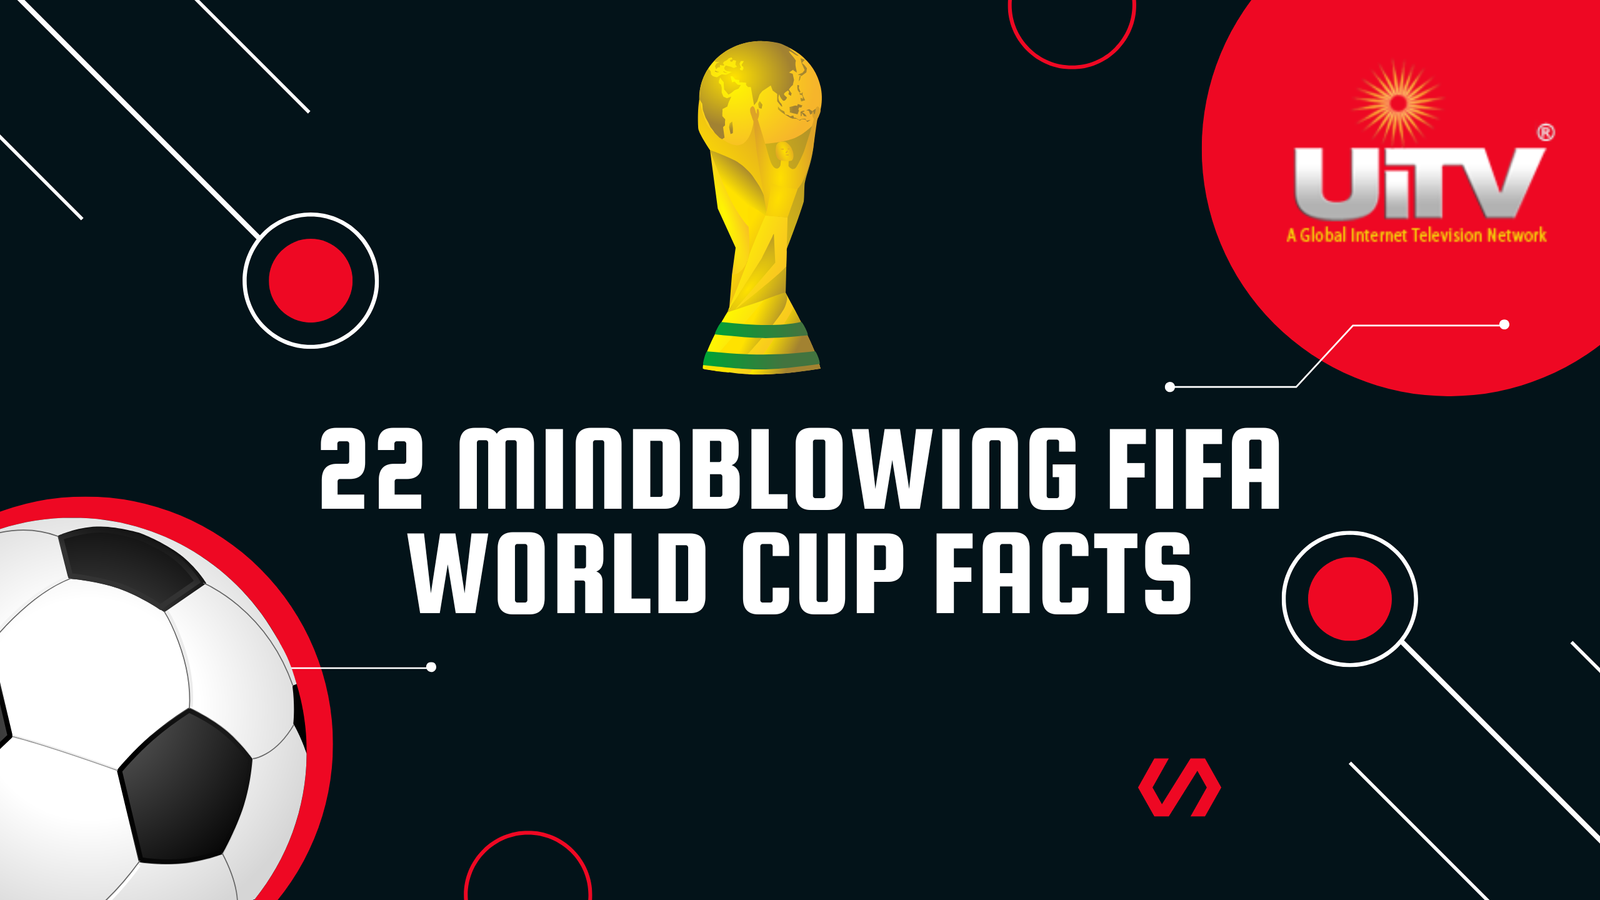 22 Mindblowing FIFA World Cup Facts